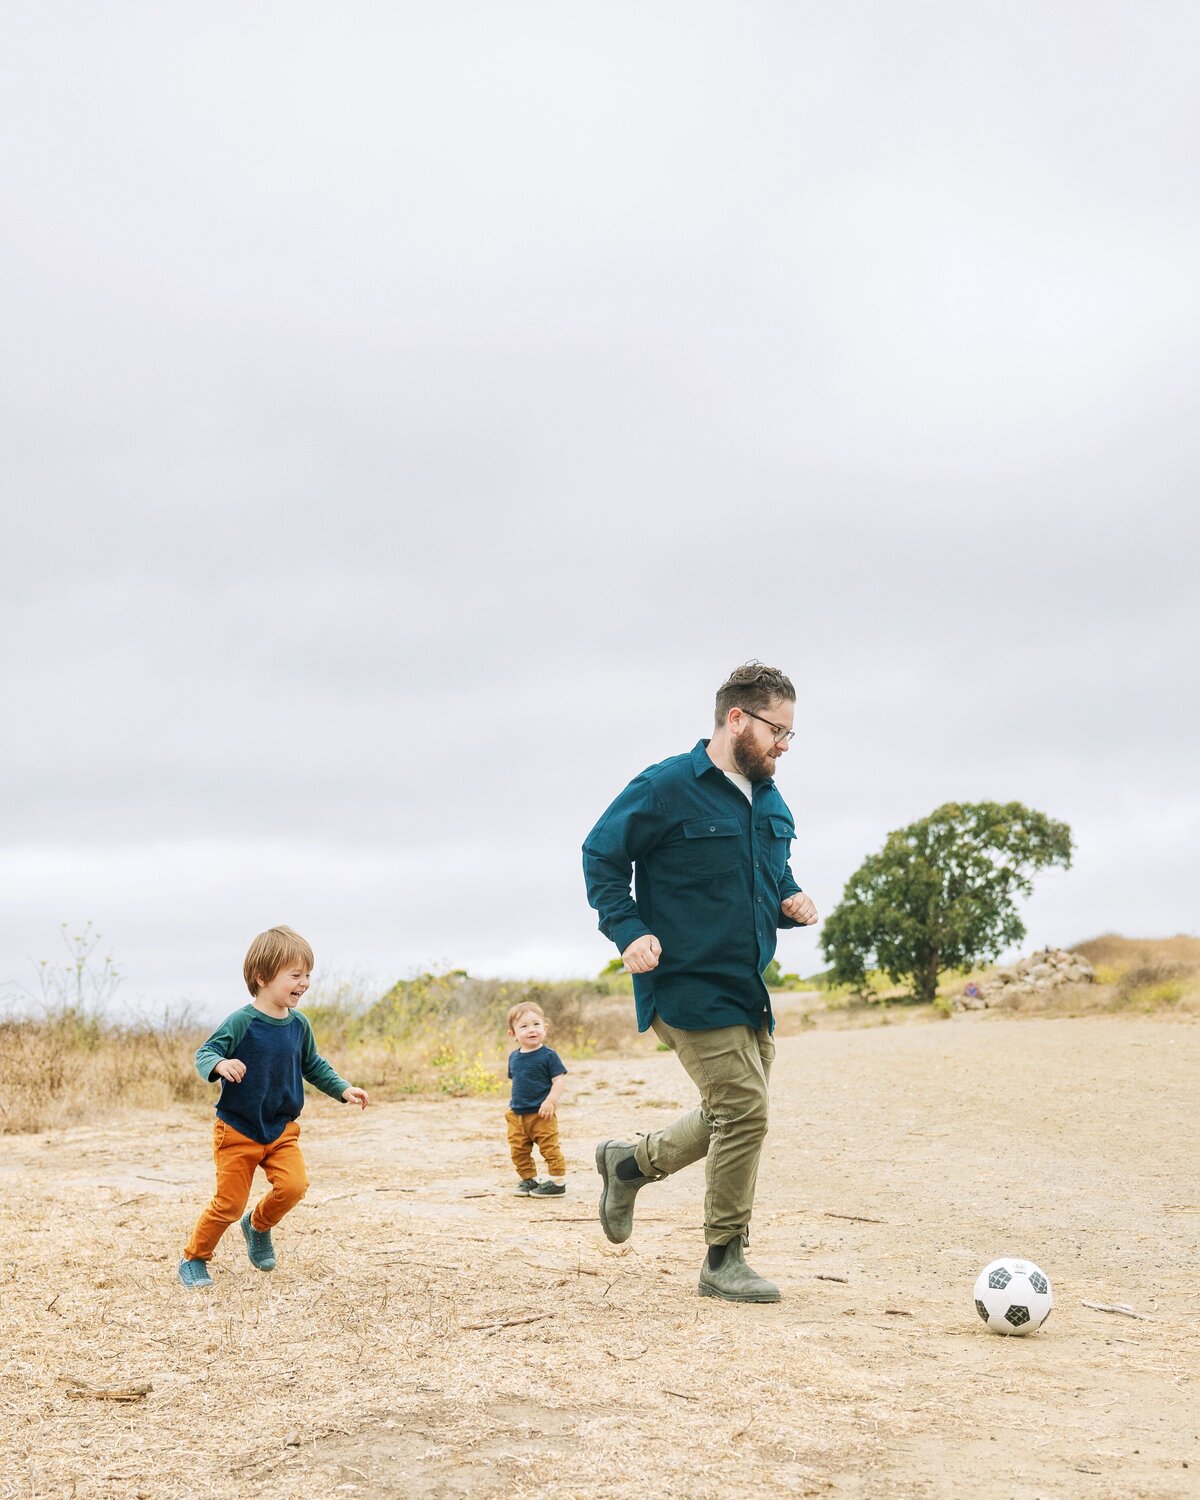 Dad plays soccer with his two kids